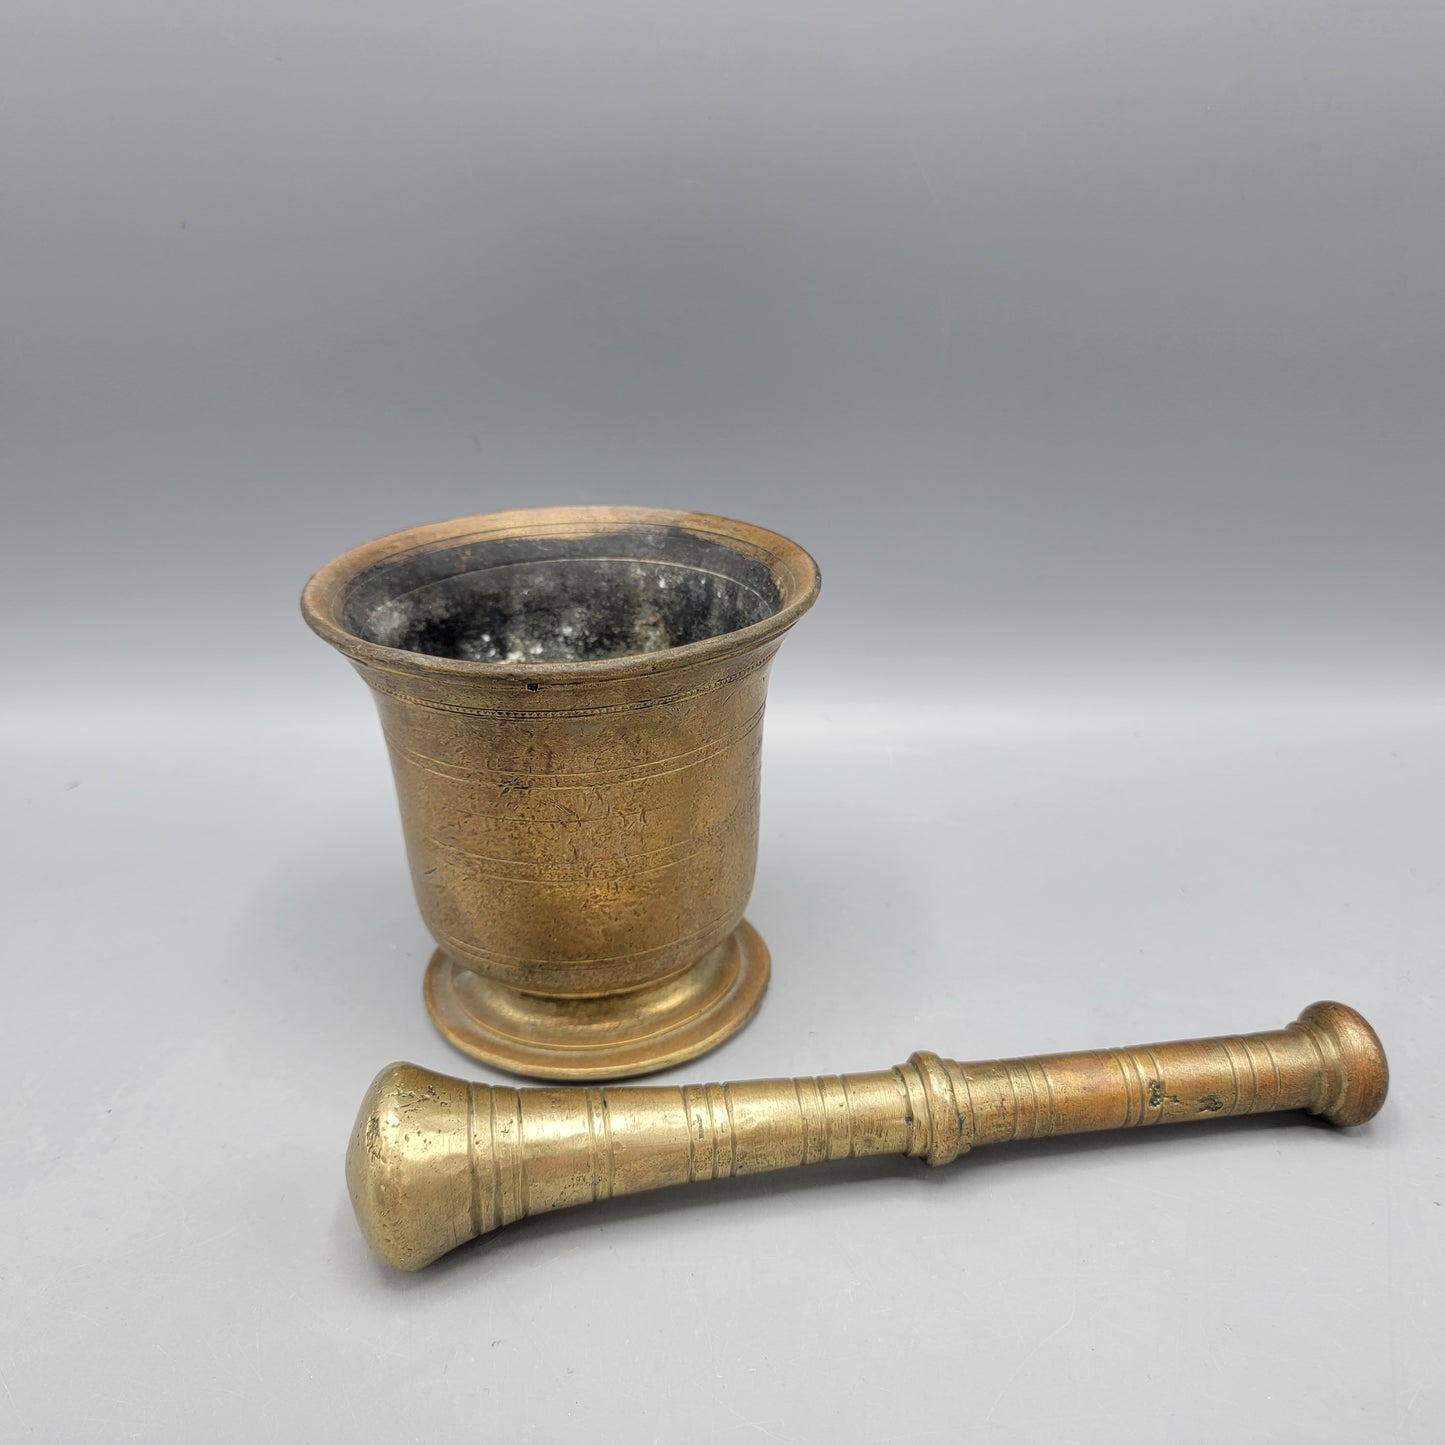 Antique Brass Bell-Form Mortar and Pestle